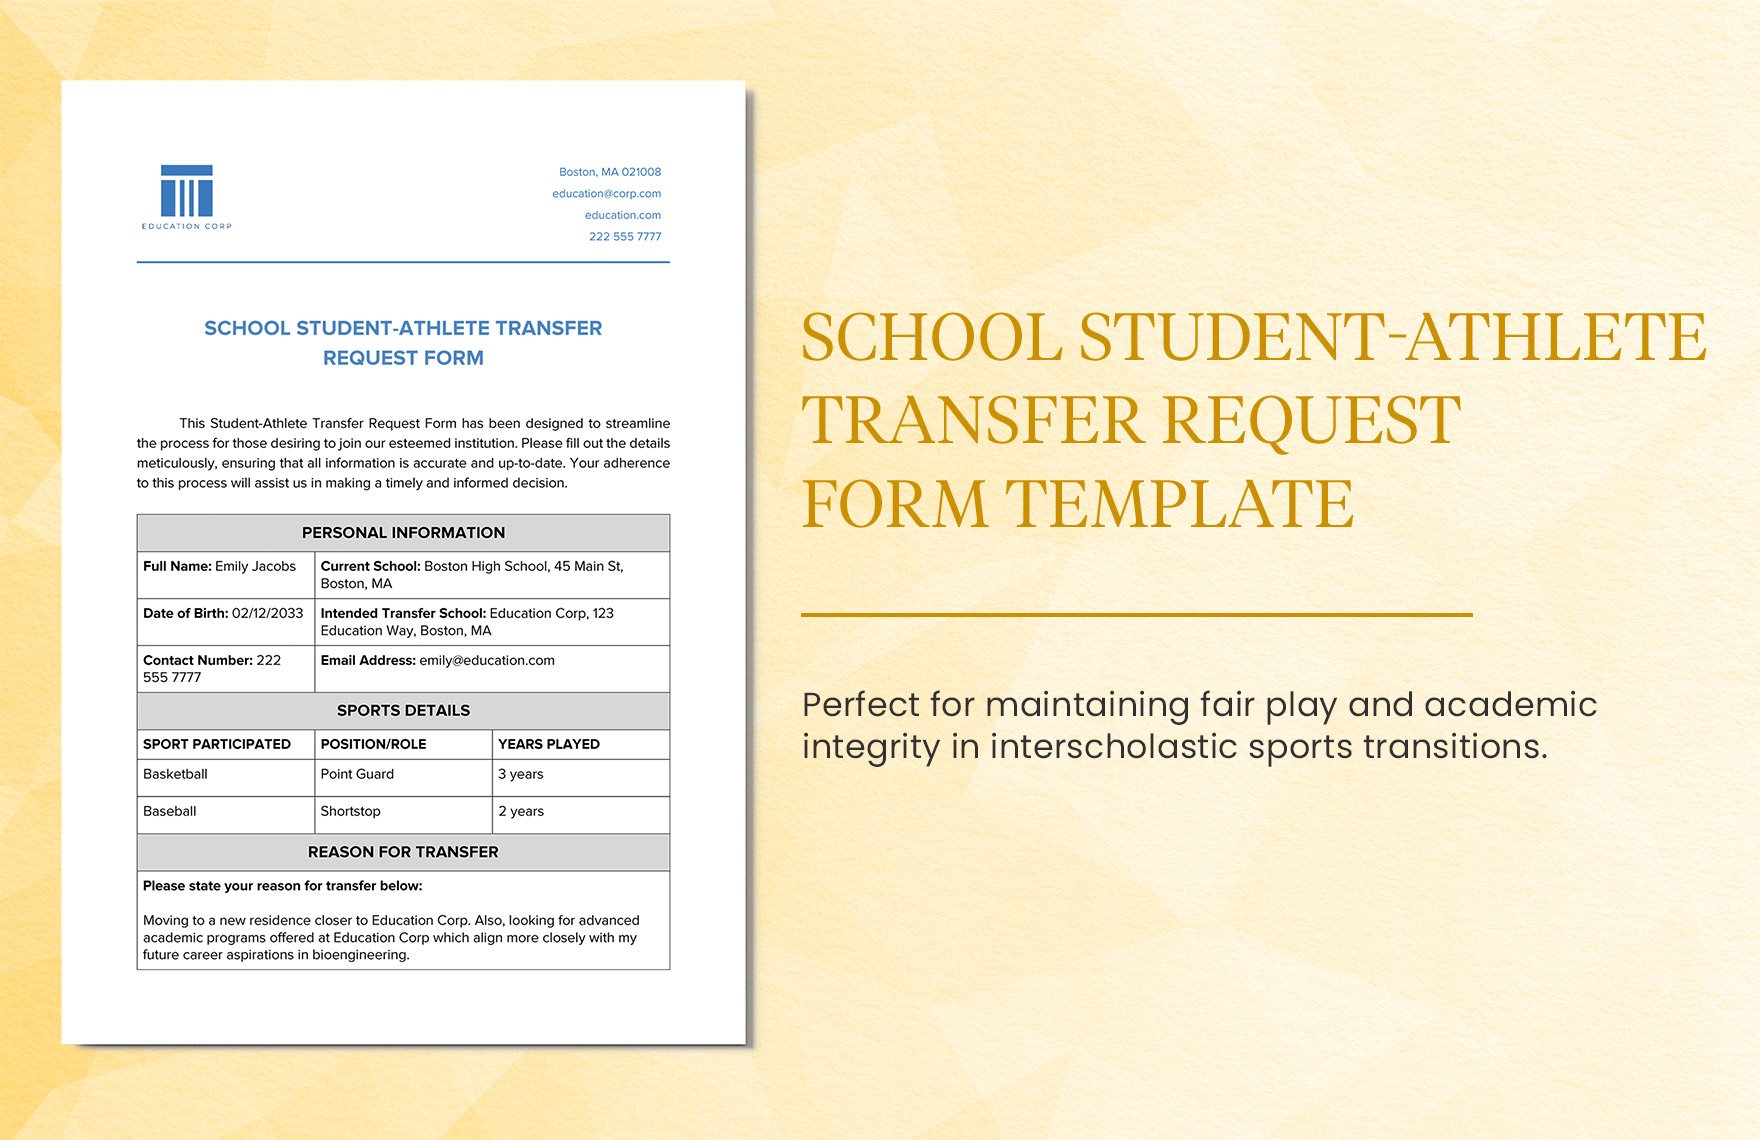 School Student-Athlete Transfer Request Form Template in Word, Google Docs, PDF